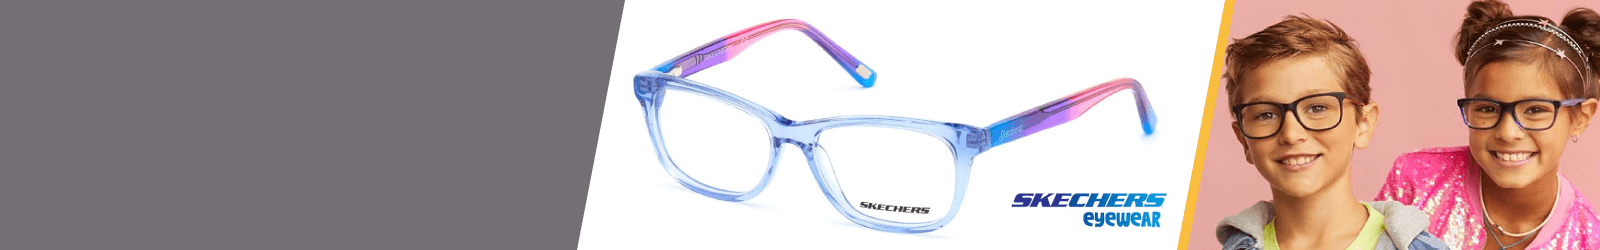 Skechers  Kids Sunglasses from 0 to 24-month-old